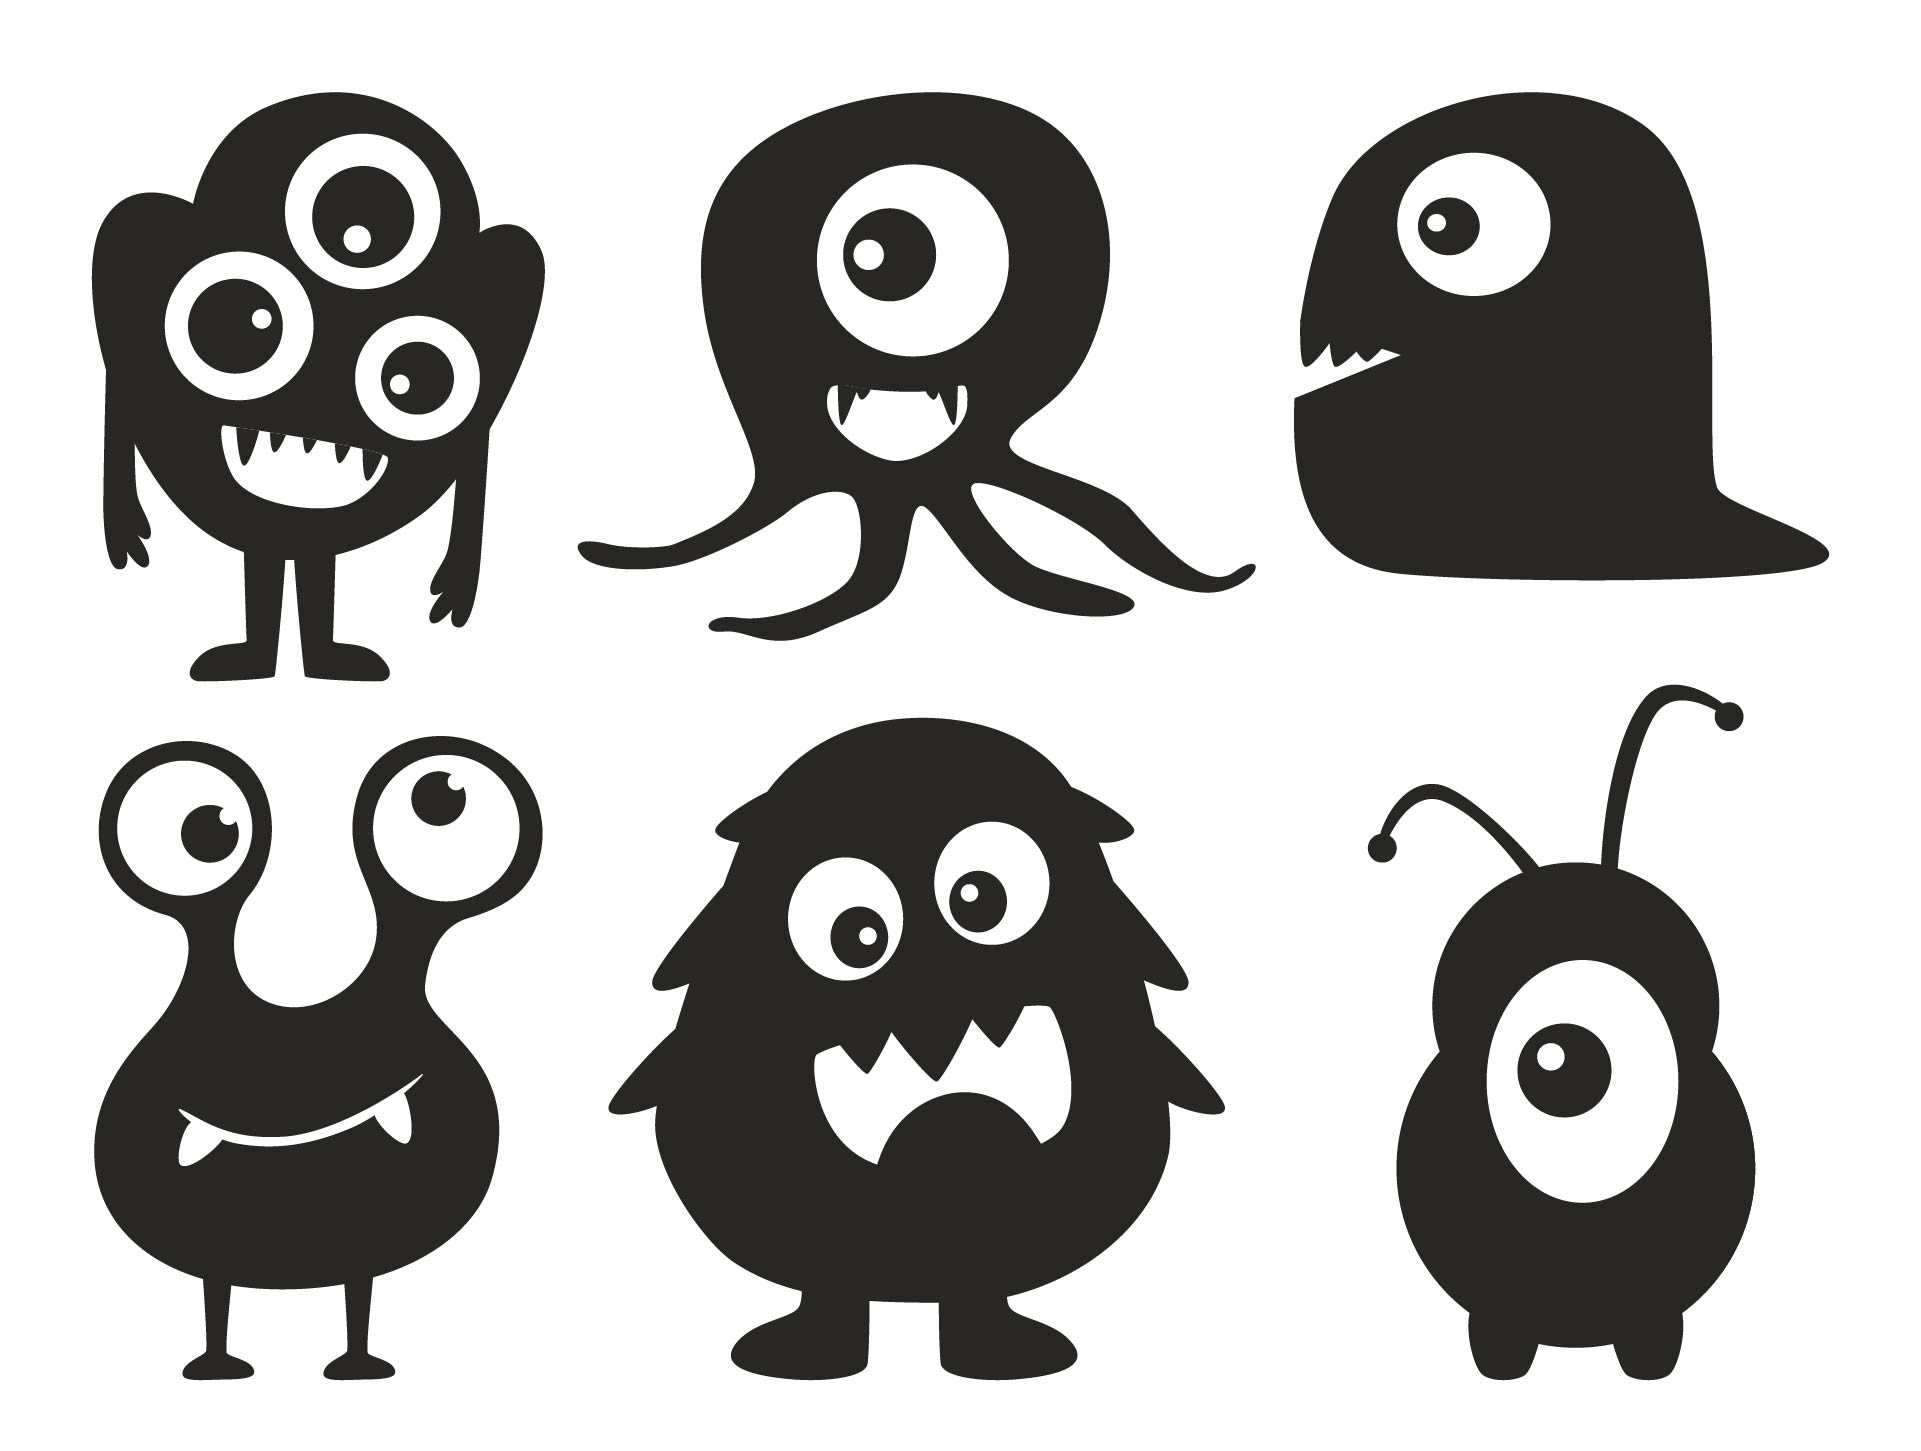 Printable Silhouettes Of Cute Doodle Monsters